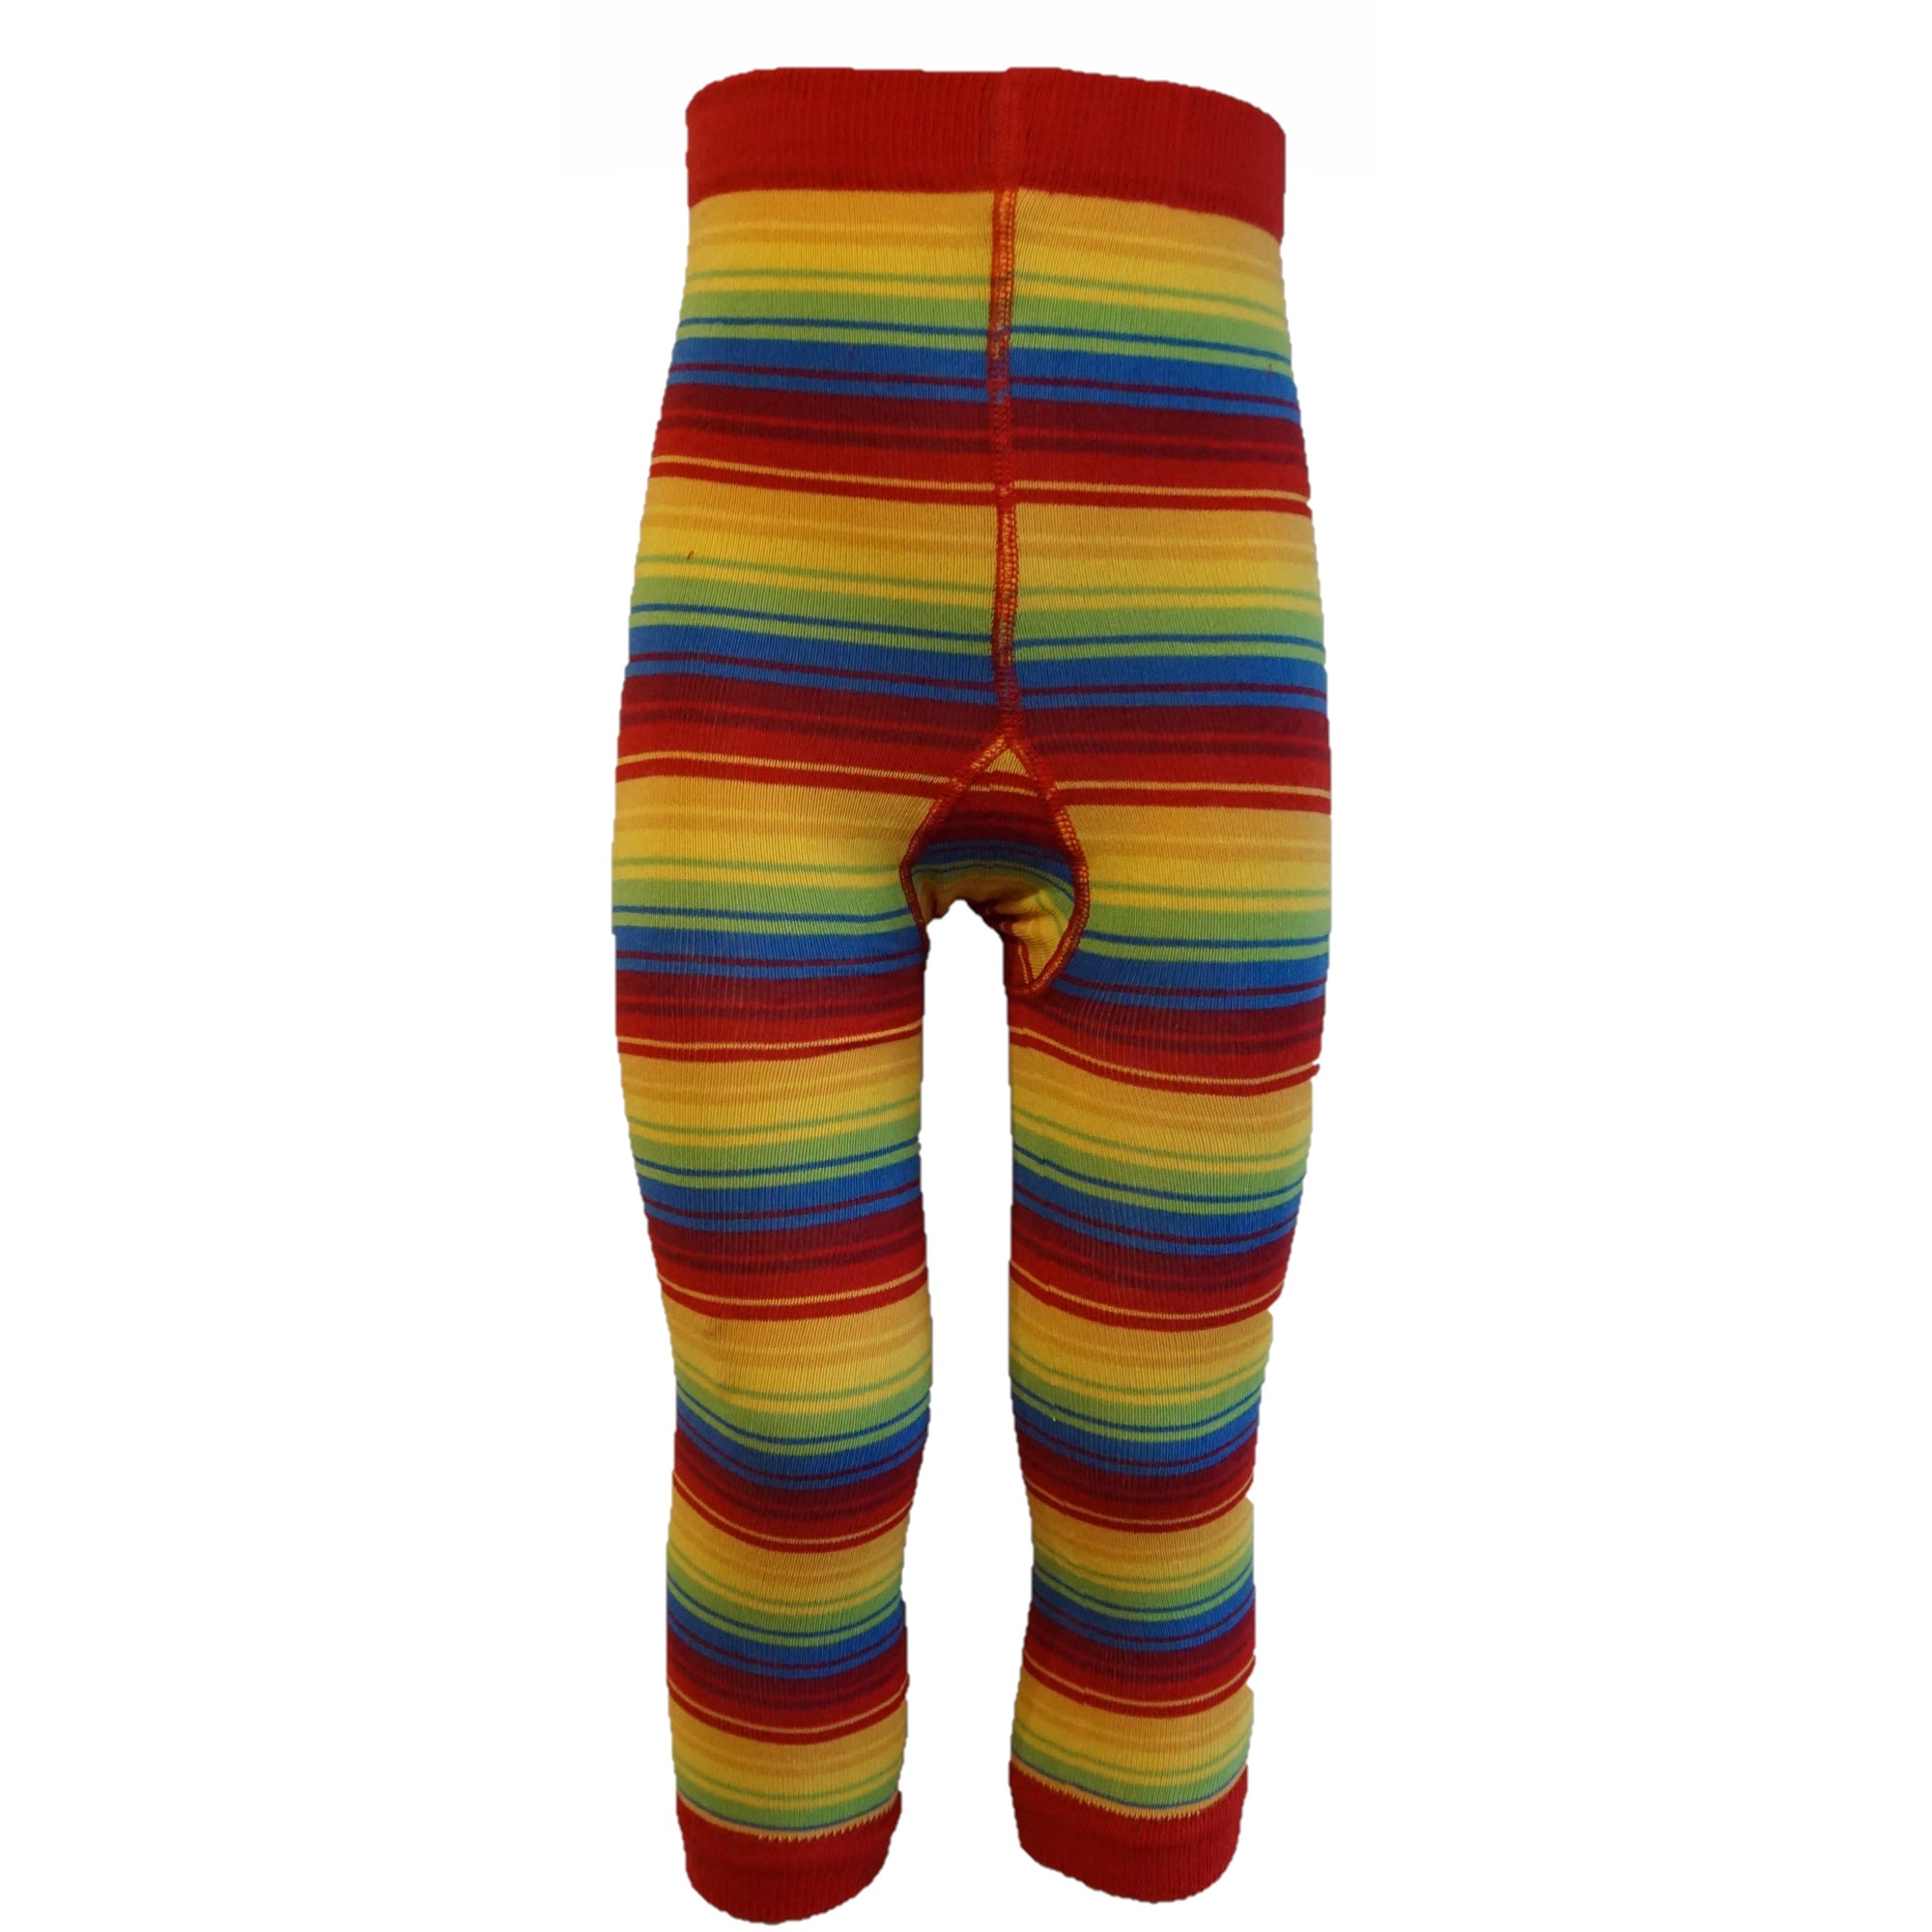 Rainbow Stripe Footless Tights / Leggings - 2 Left Size 6-12 months-Slugs and Snails-Modern Rascals